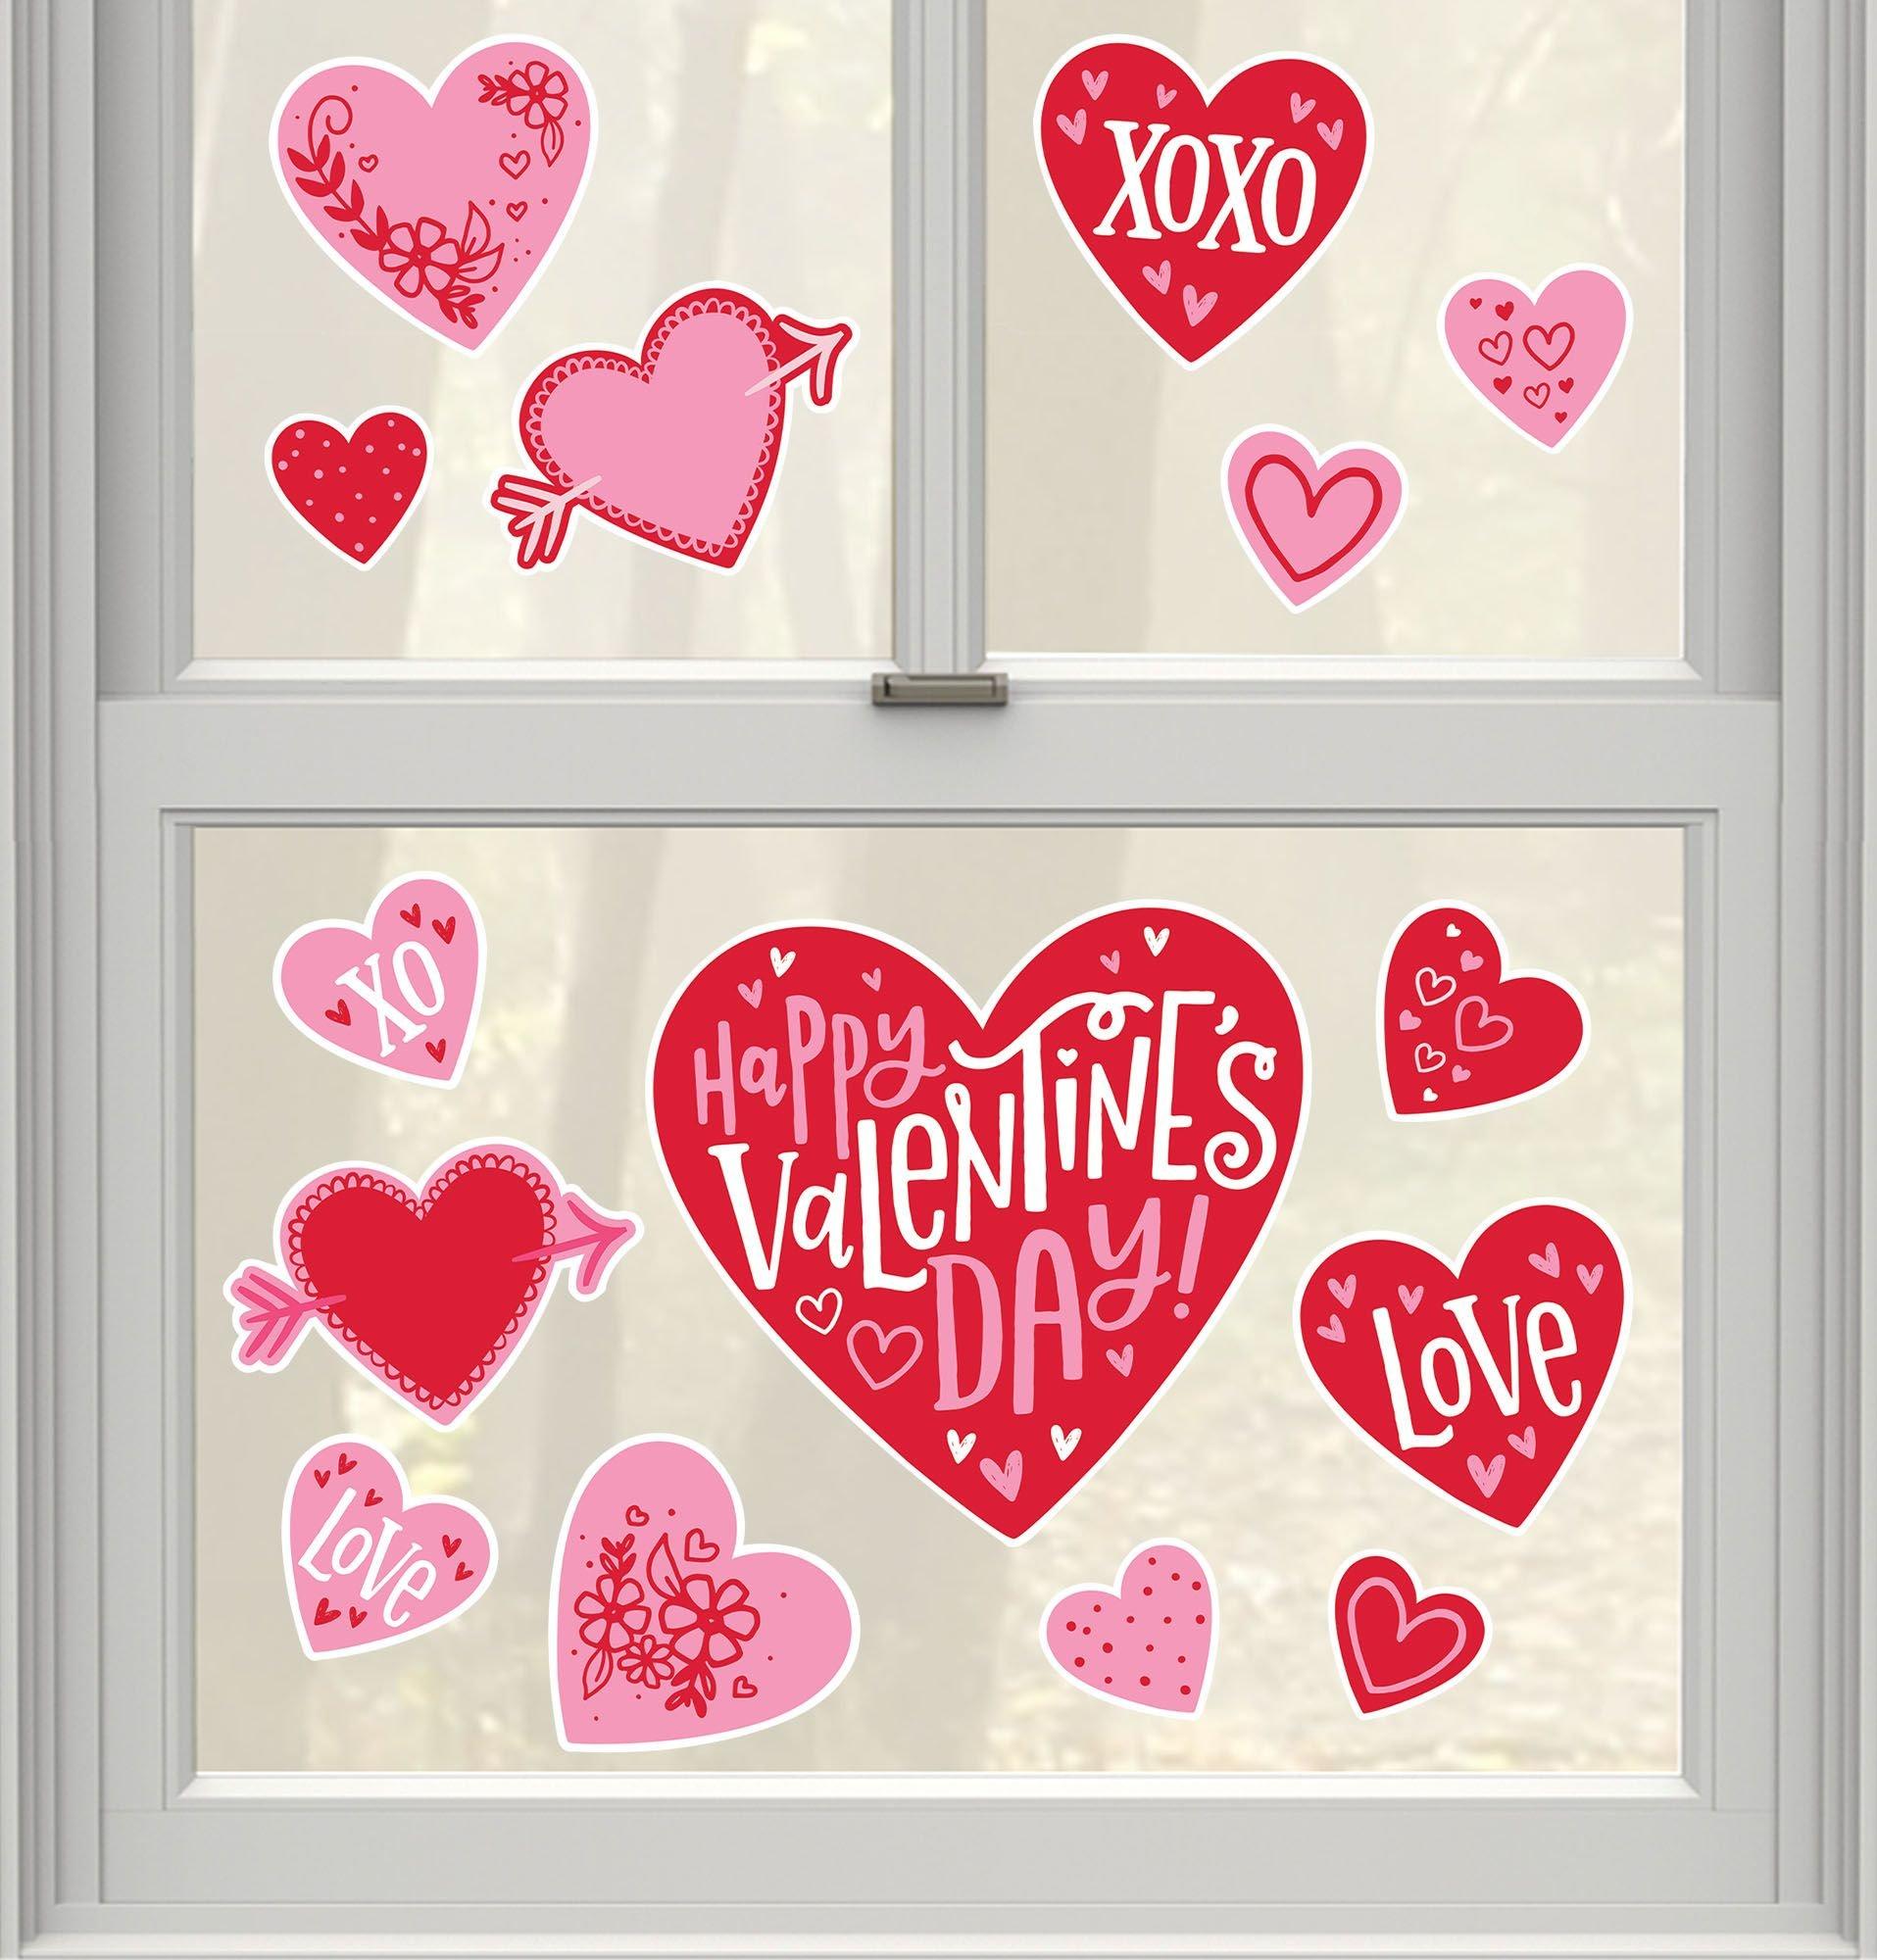 Happy Valentine's Day Vinyl Cling Decals, 15pc | Party City